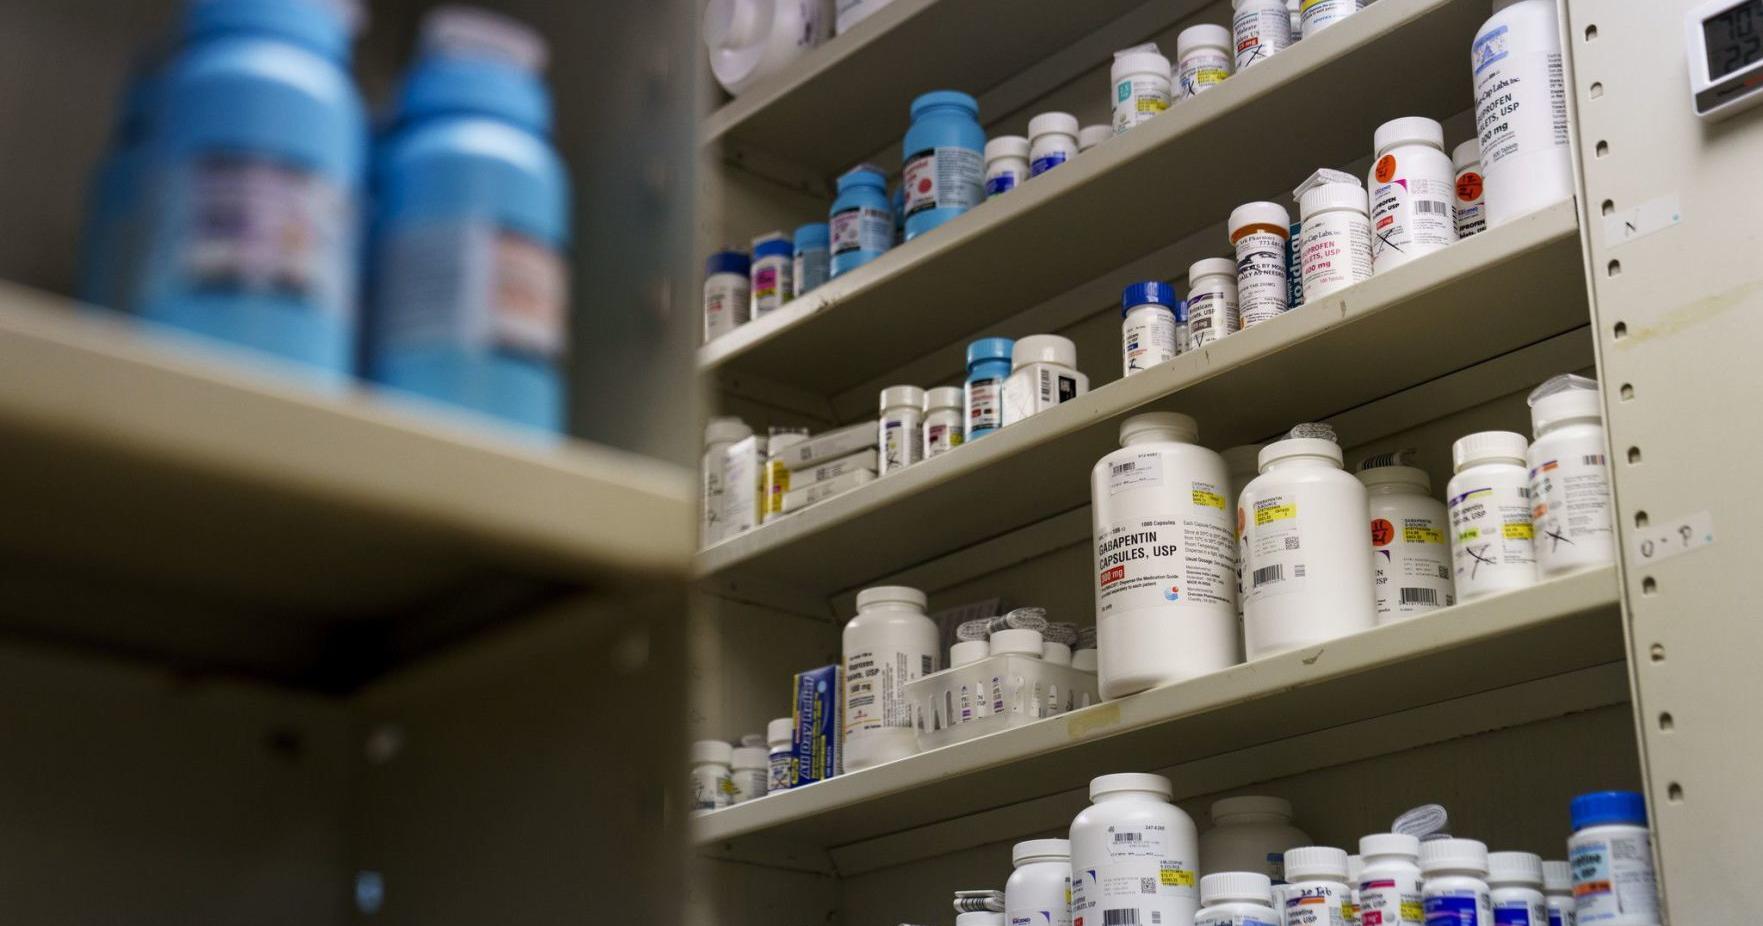 Unused medication can be donated under new Illinois law